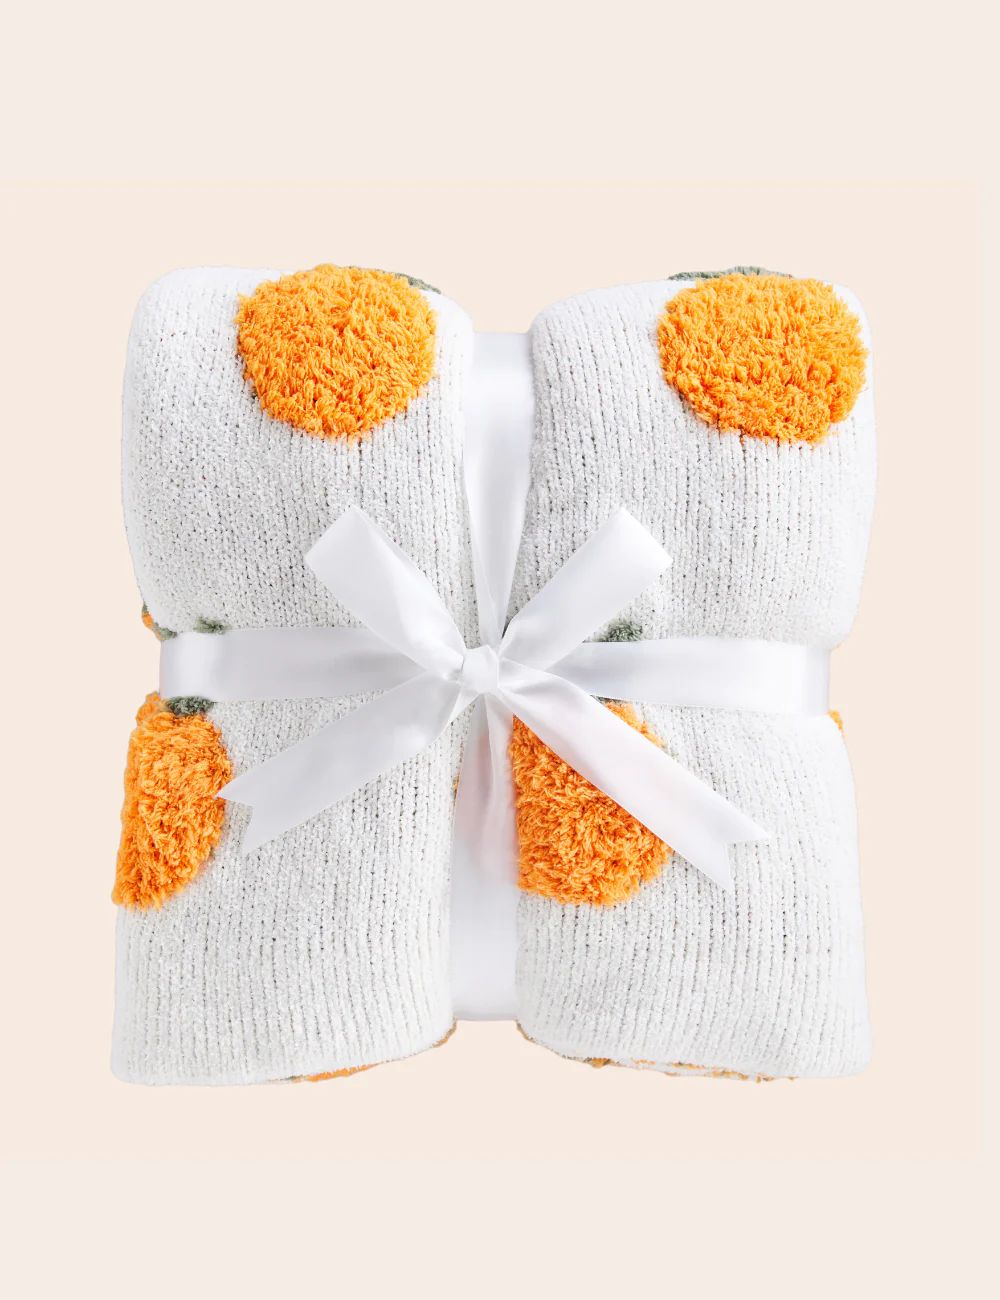 Oranges Buttery Blanket- Receiving | The Styled Collection